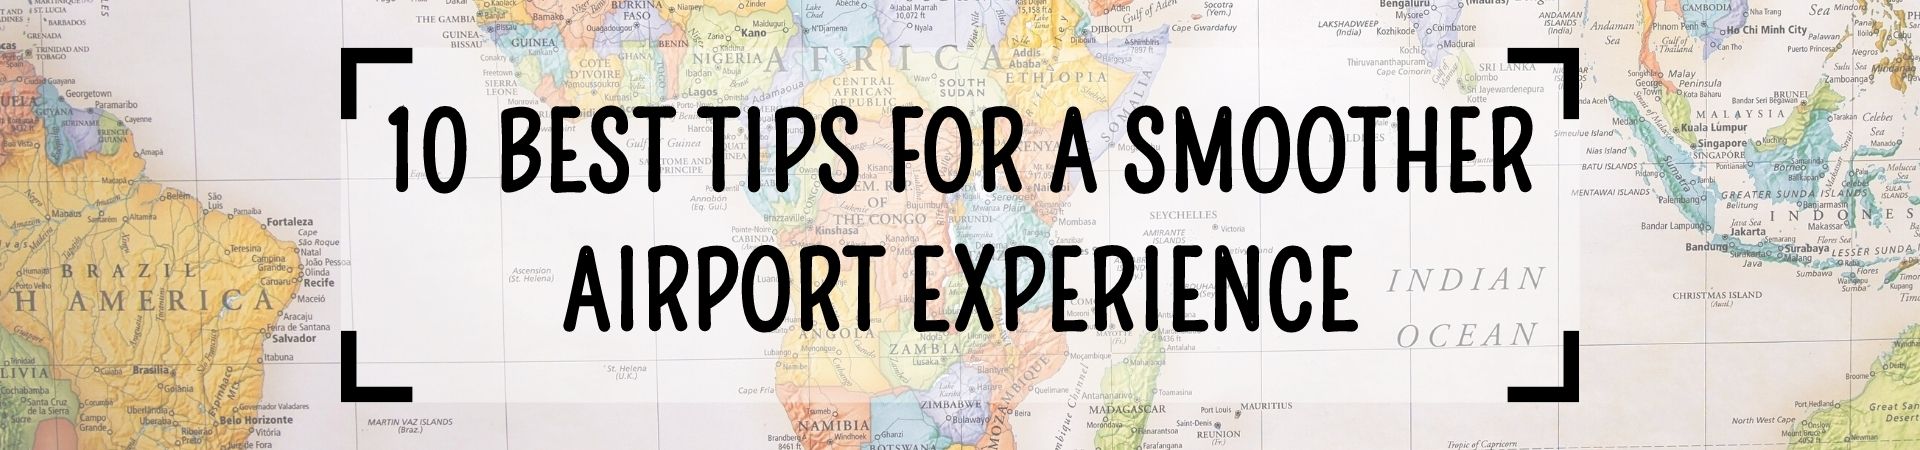 10 Best Tips for a Smoother Airport Experience